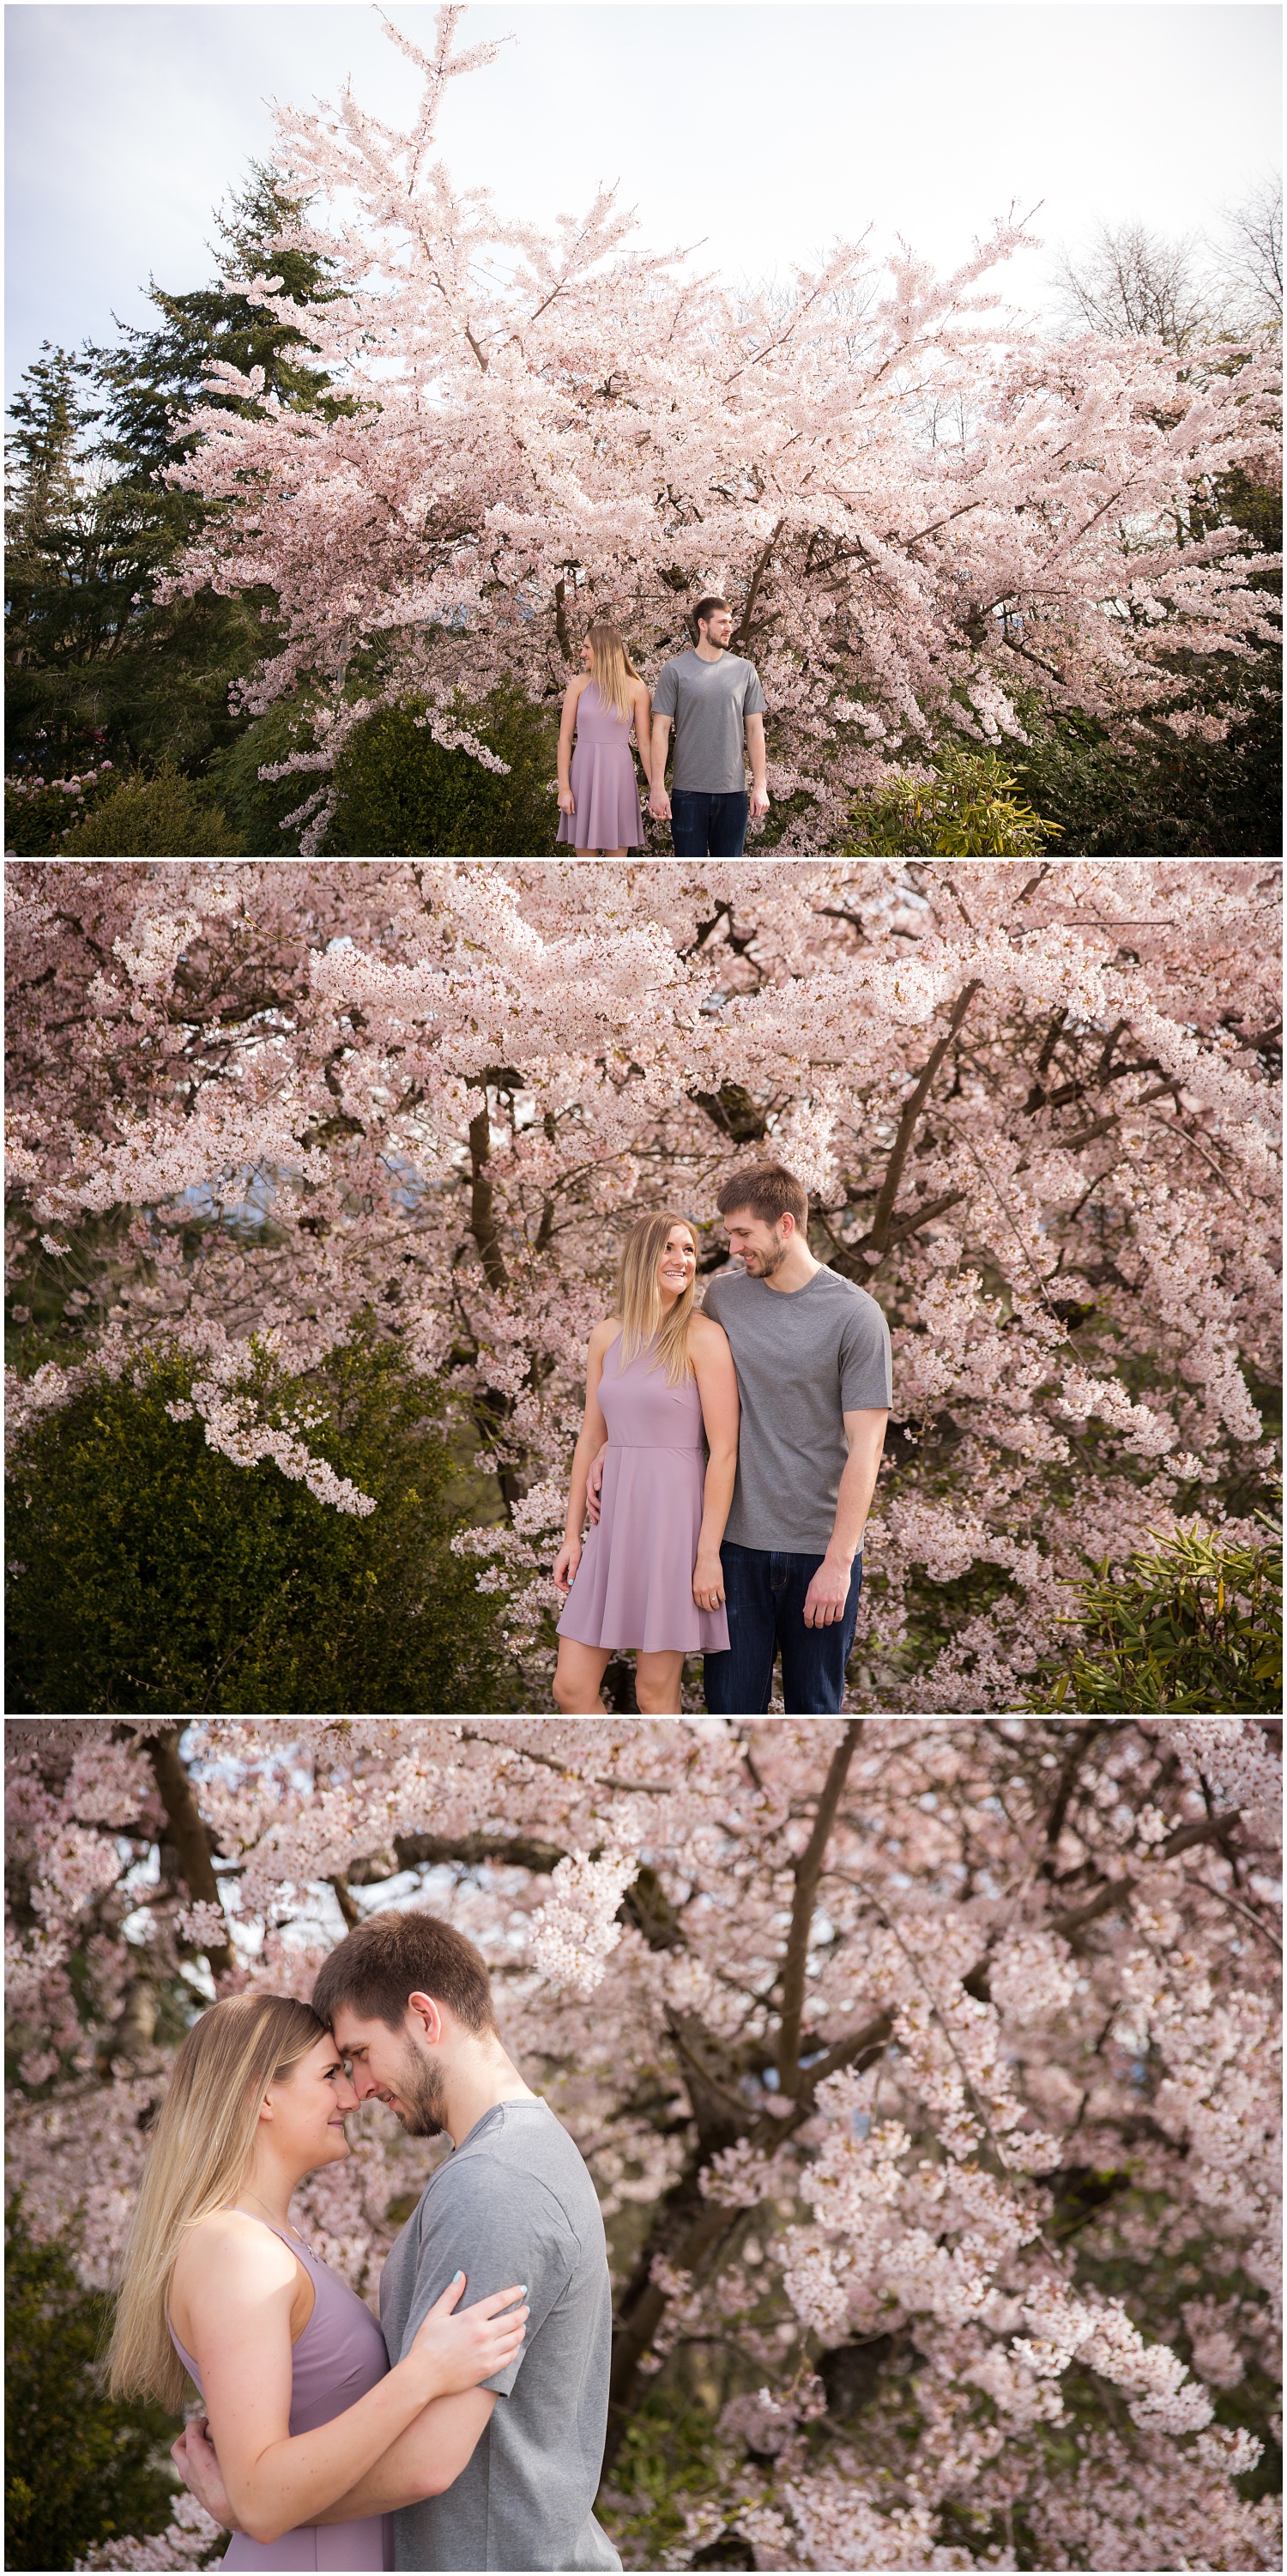 Amazing Day Photography - Cherry Blossom Engagement Session - Queen Elizabeth Park Engagement Session - Vancouver Engagement Photographer  (12).jpg